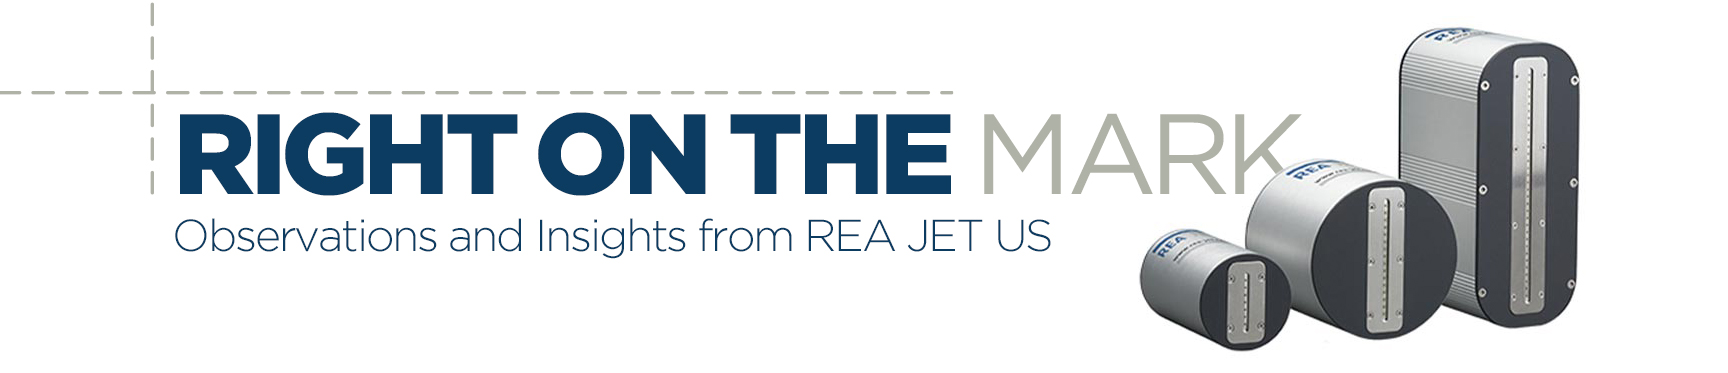 right on the mark, observations and insights from REA Jet US - Blog Header graphic